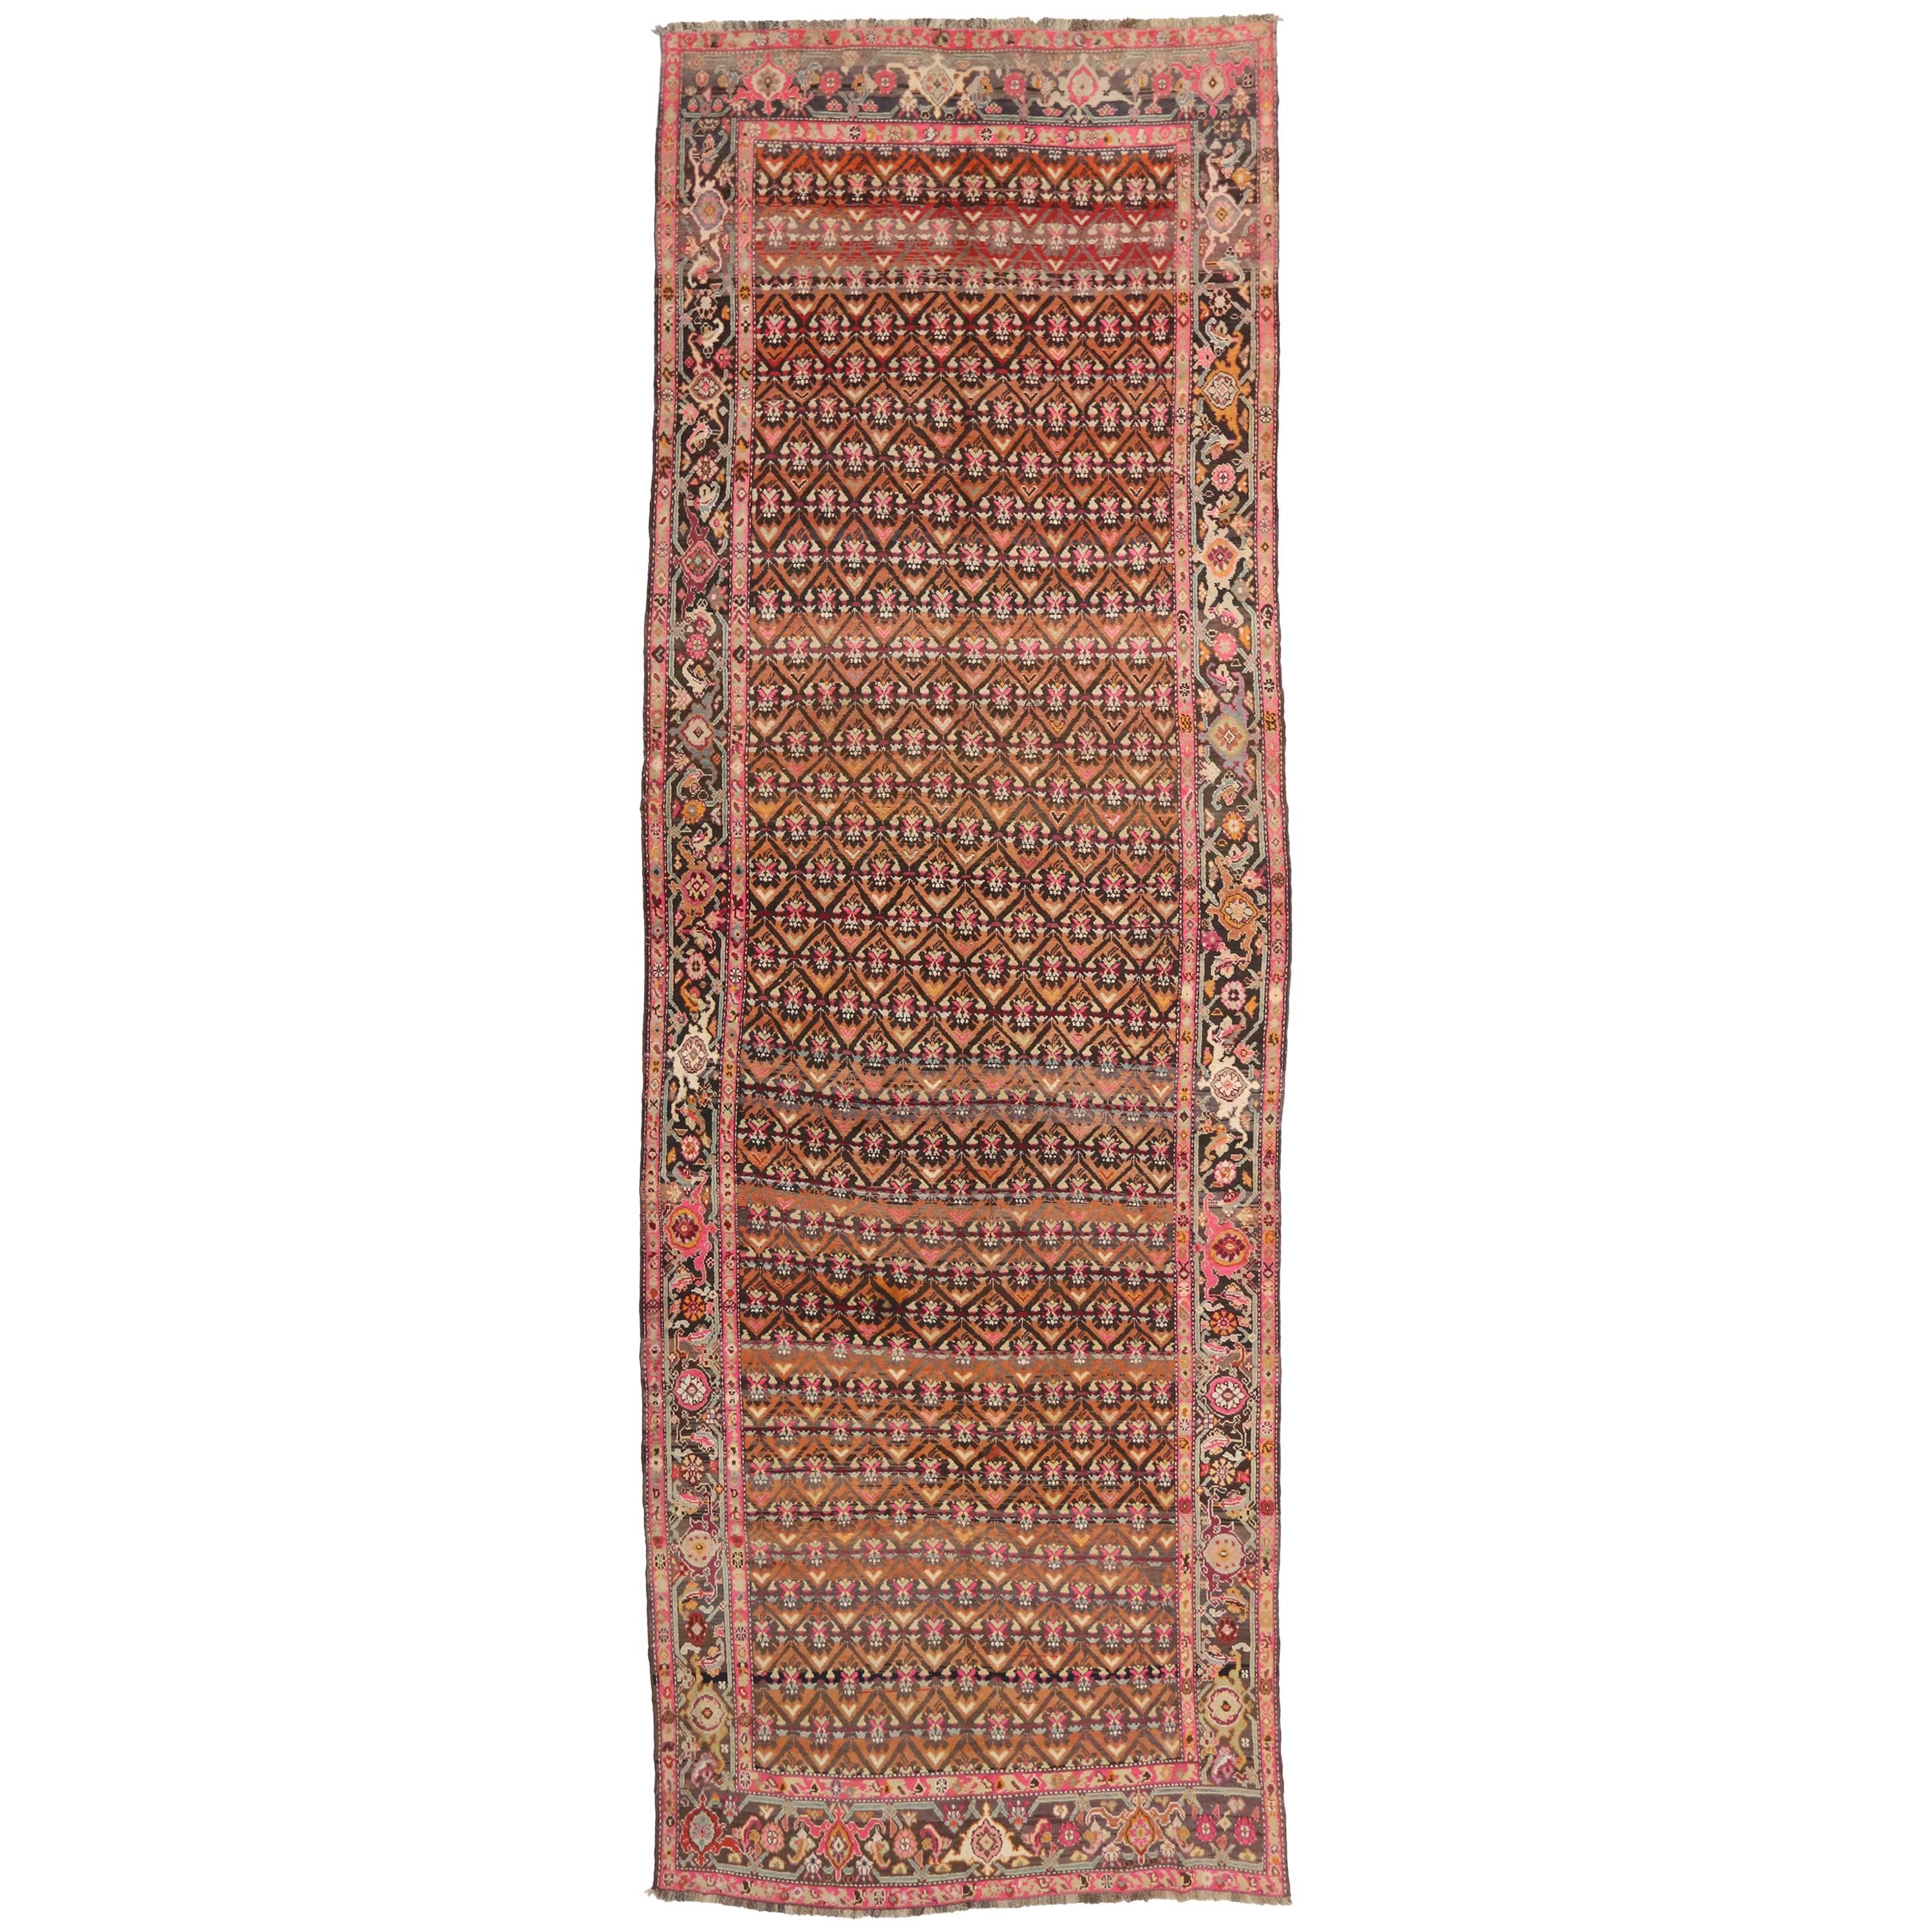 Antique Caucasian Karabakh Gallery Rug with Mid-Century Modern Style 